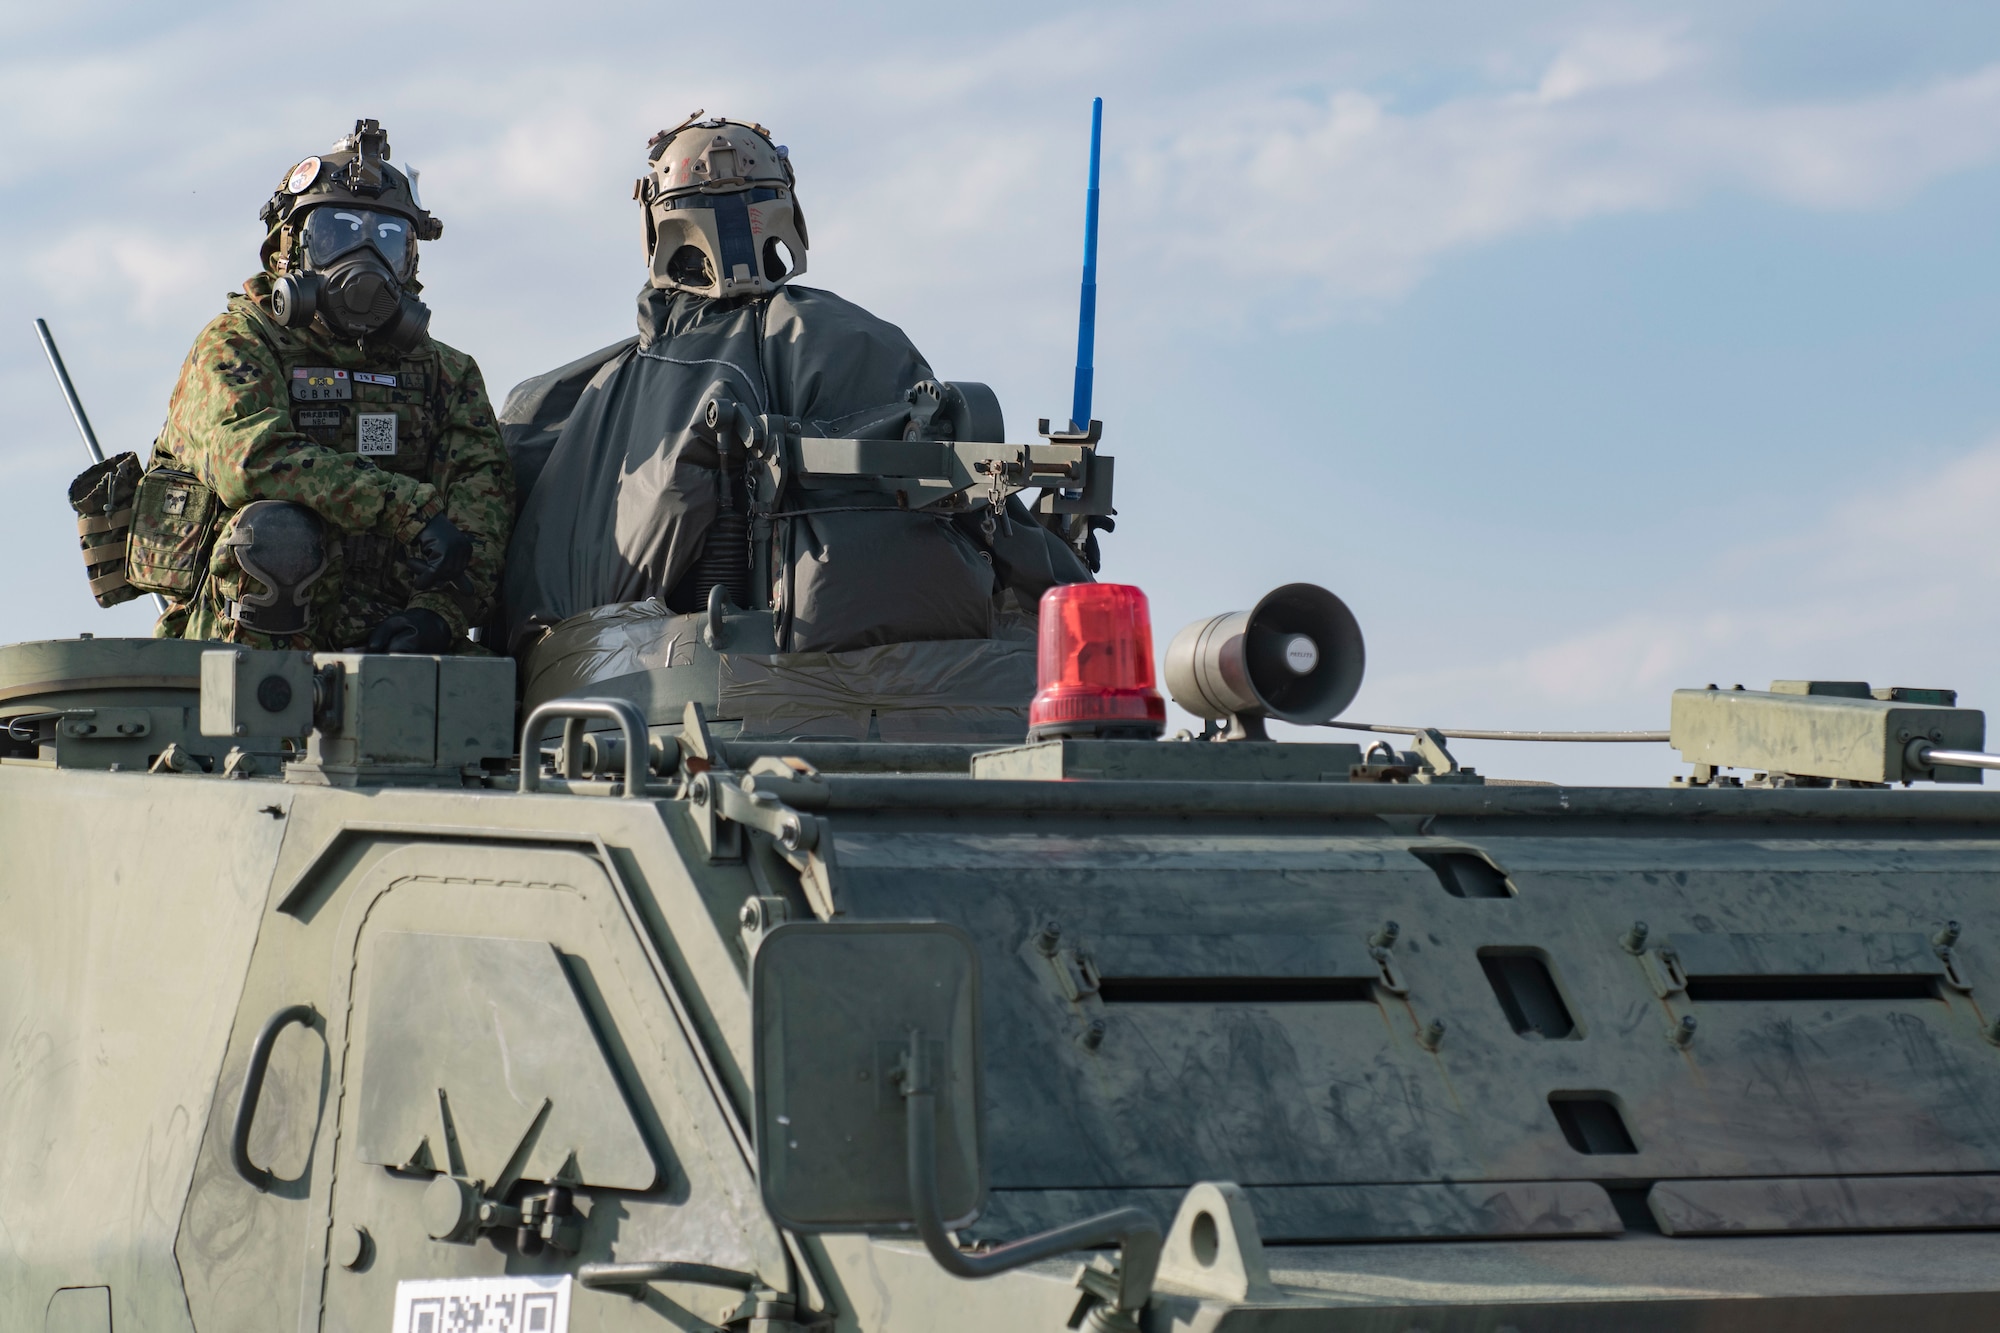 A Japan Ground Self-Defense Force member in protective gear gestures to the crowd from atop an armored personnel carrier during Friendship Festival 2022, at Yokota Air Base, Japan, May 22, 2022. The two-day festival was an opportunity for visitors to learn more about the U.S. and Japan bilateral partnership, while strengthening the bonds between Yokota and the local communities. Yokota was able to host the event with the support of Japan Self-Defense Force, sister services and the local community. (U.S. Air Force photo by Machiko Arita)